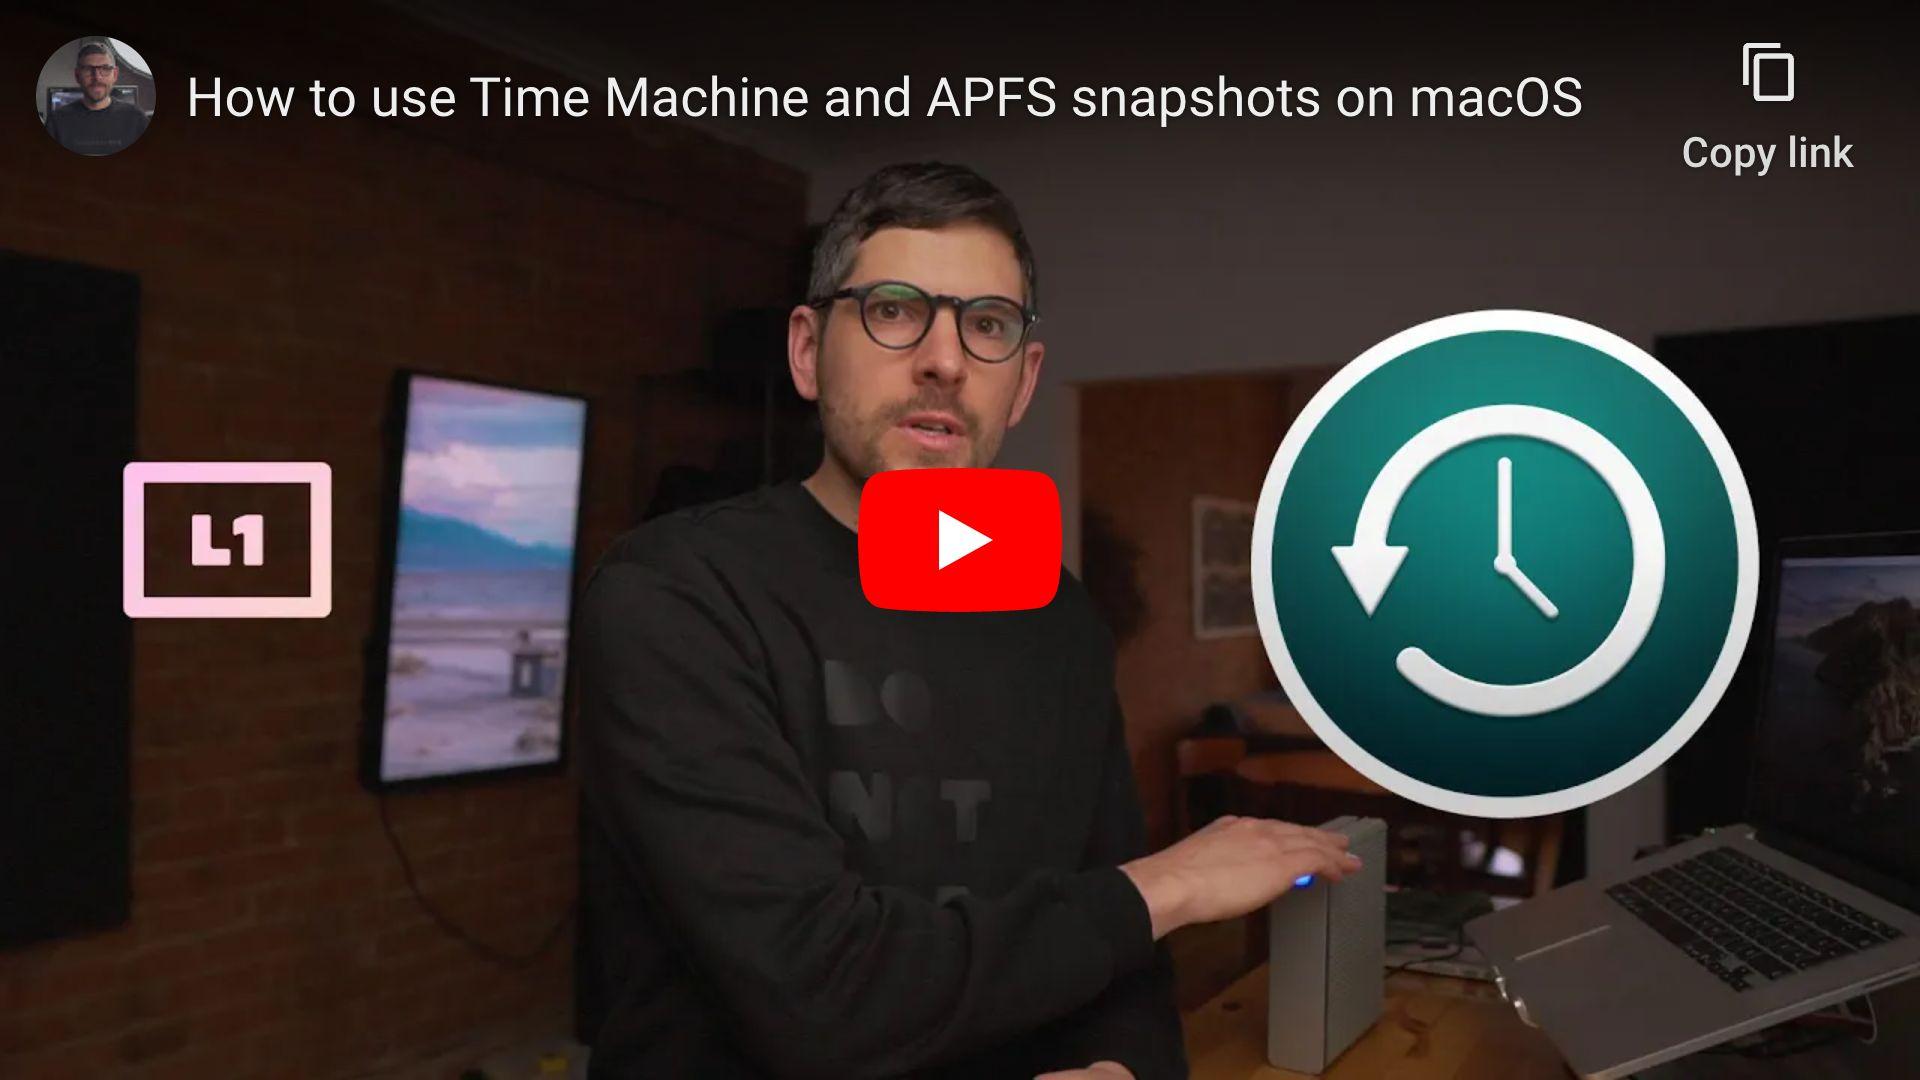 How to use Time Machine and APFS snapshots on macOS